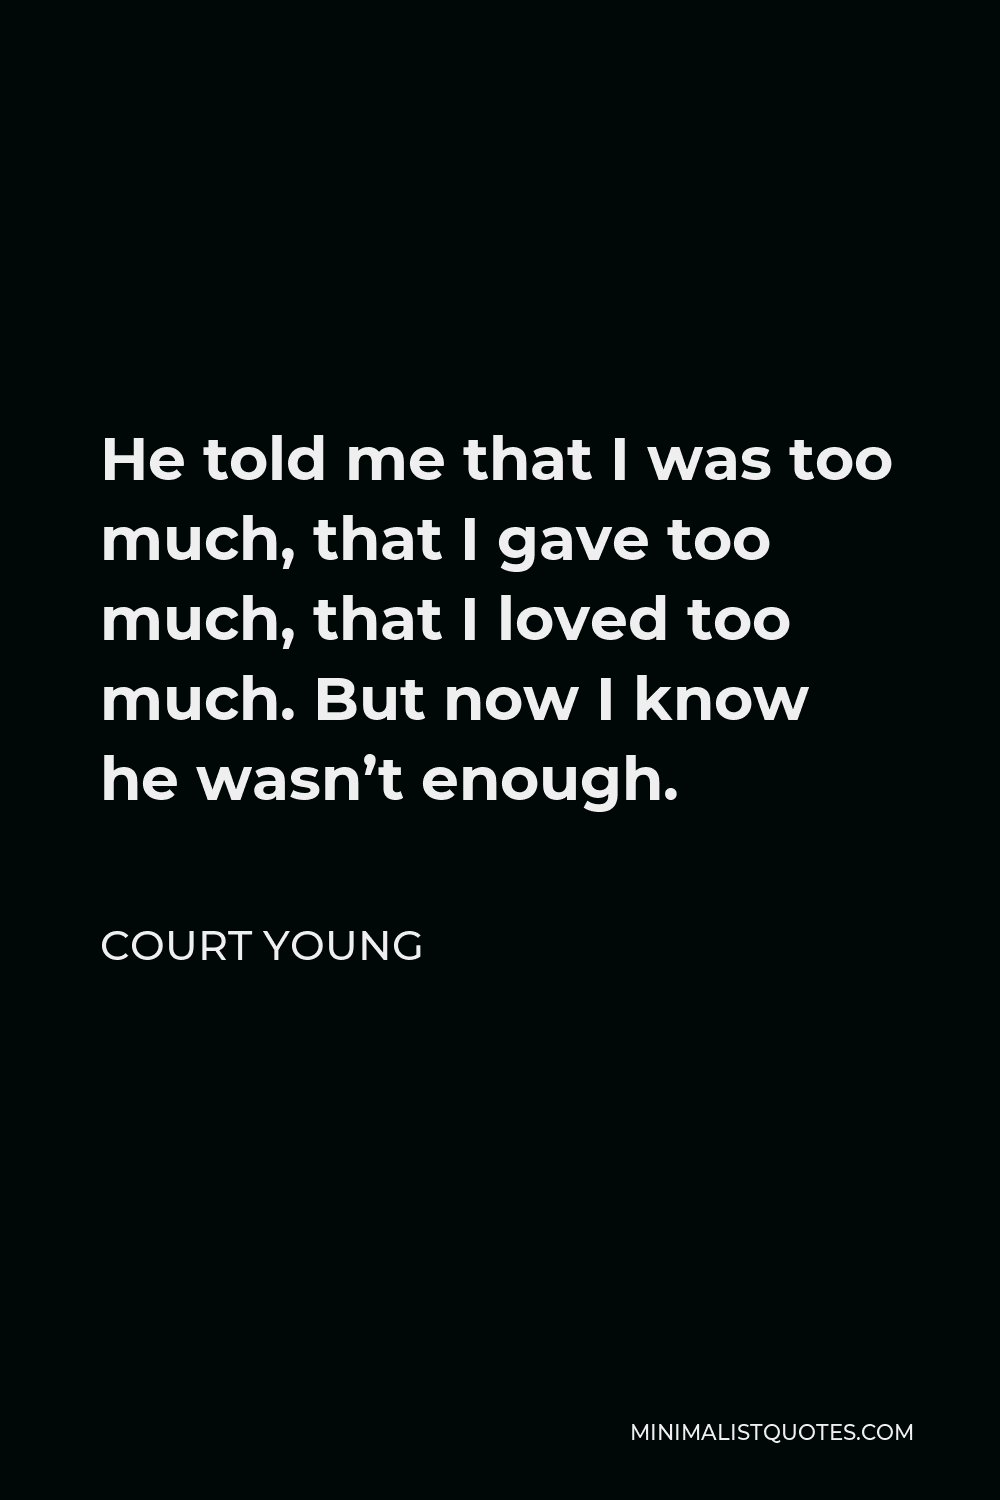 Court Young Quote - He told me that I was too much, that I gave too much, that I loved too much. But now I know he wasn’t enough.